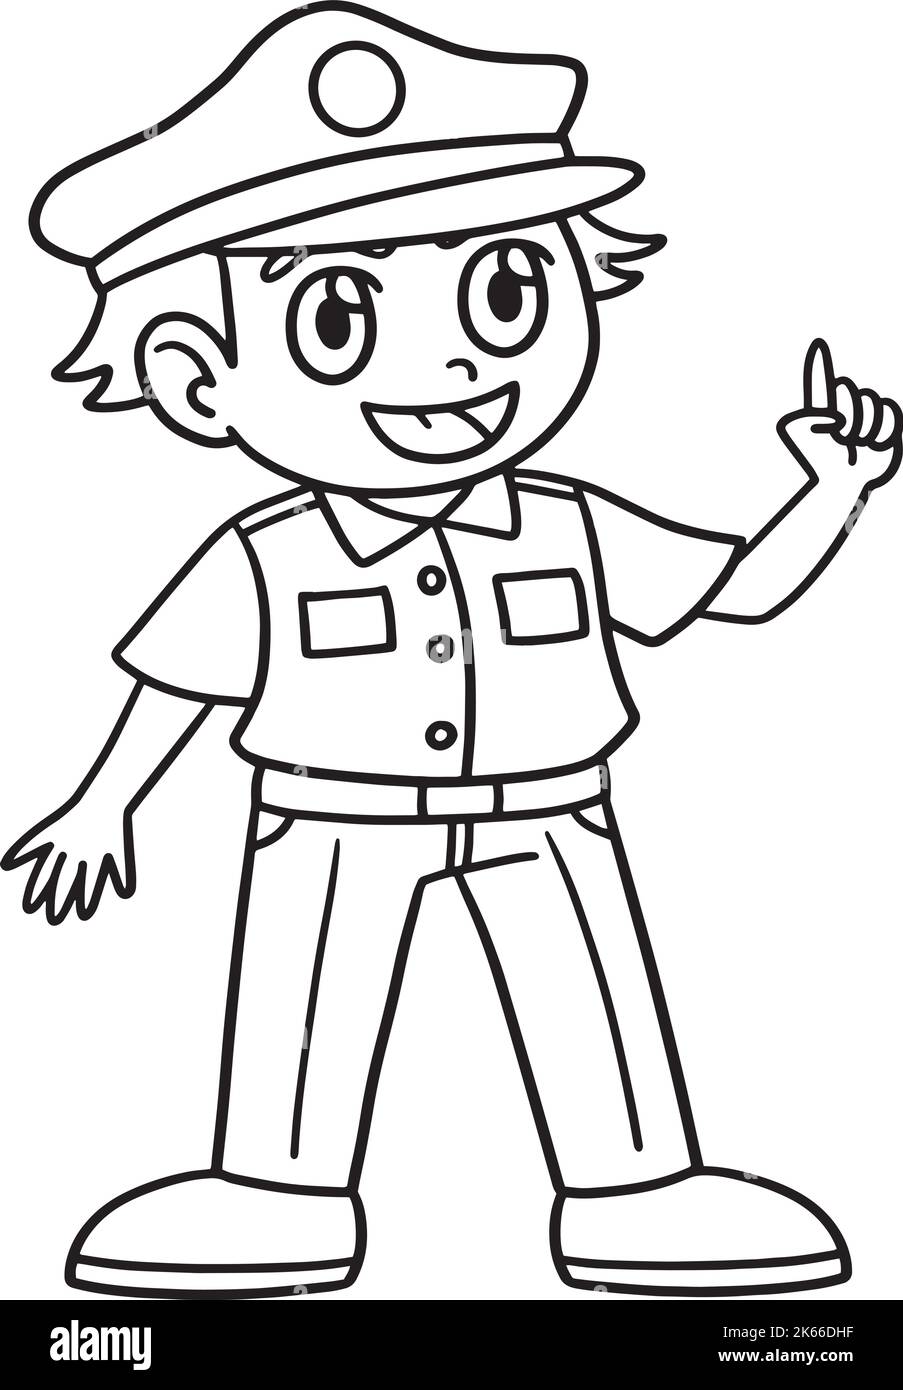 Police Officer Isolated Coloring Page for Kids Stock Vector